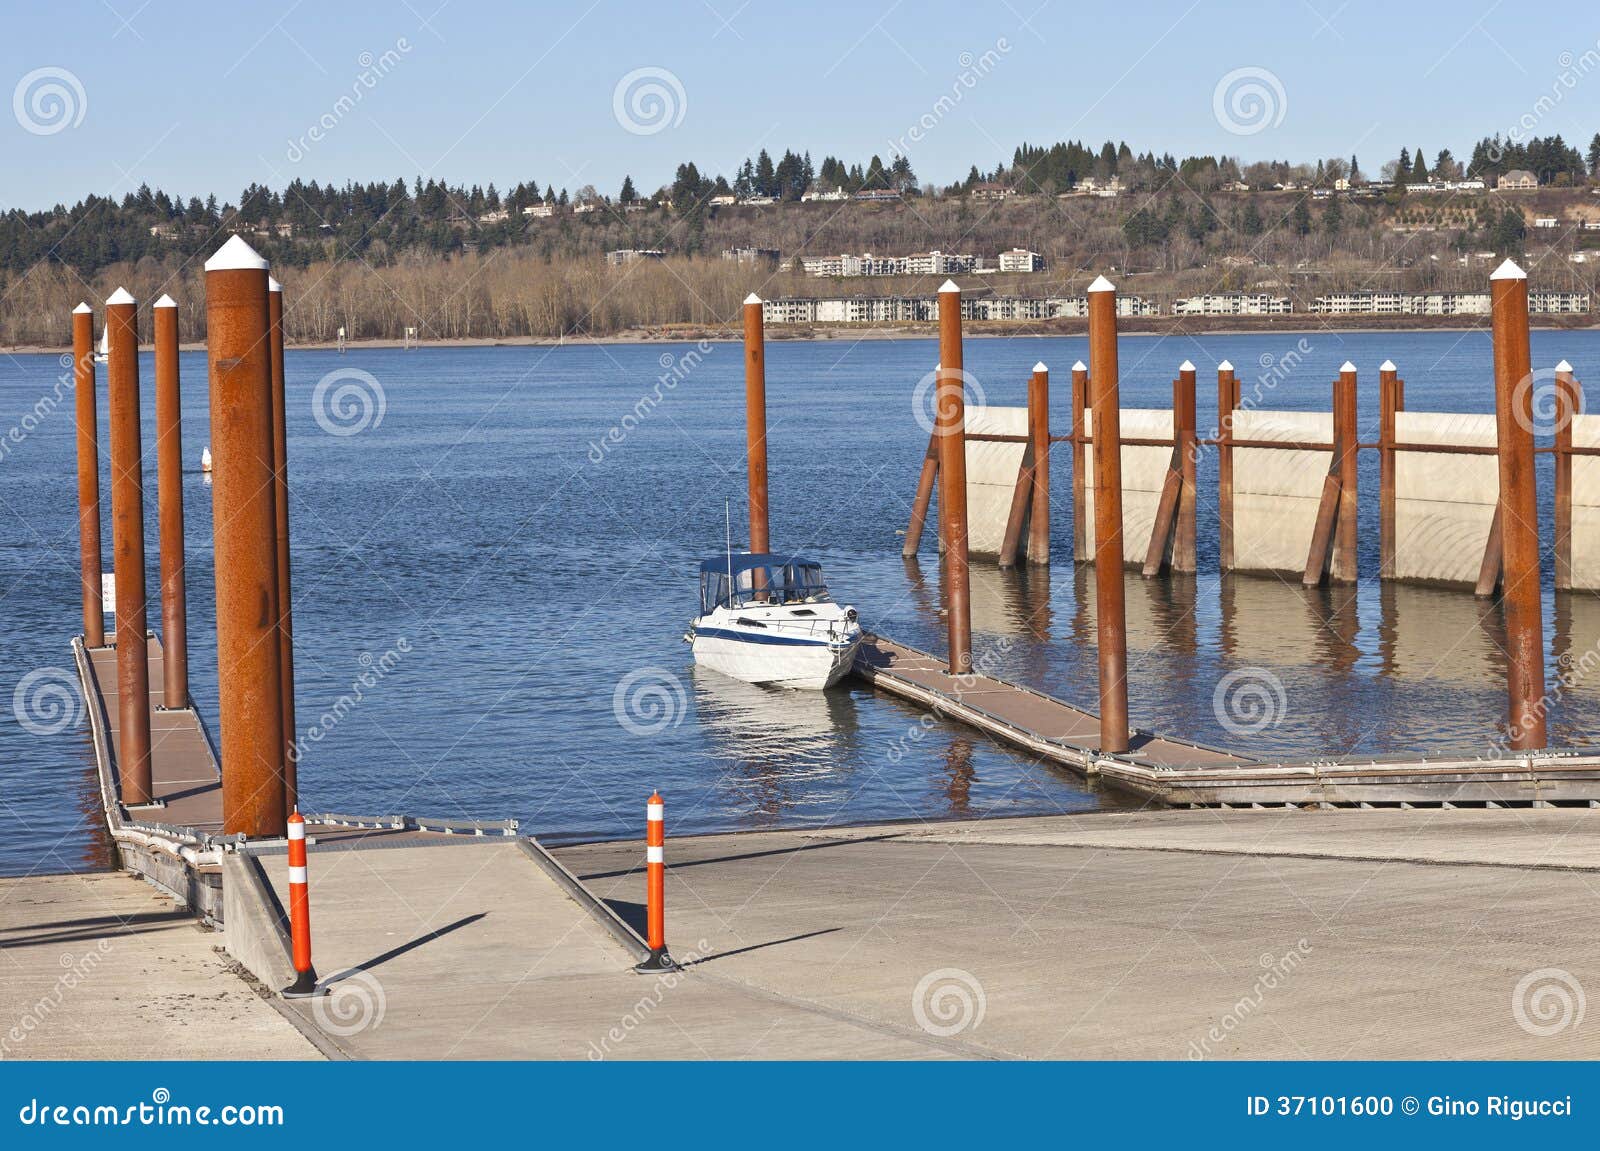 Boat Launch Pads and Steel Poles Oregon State Parks. Stock Photo - Image of  building, oregon: 37101600